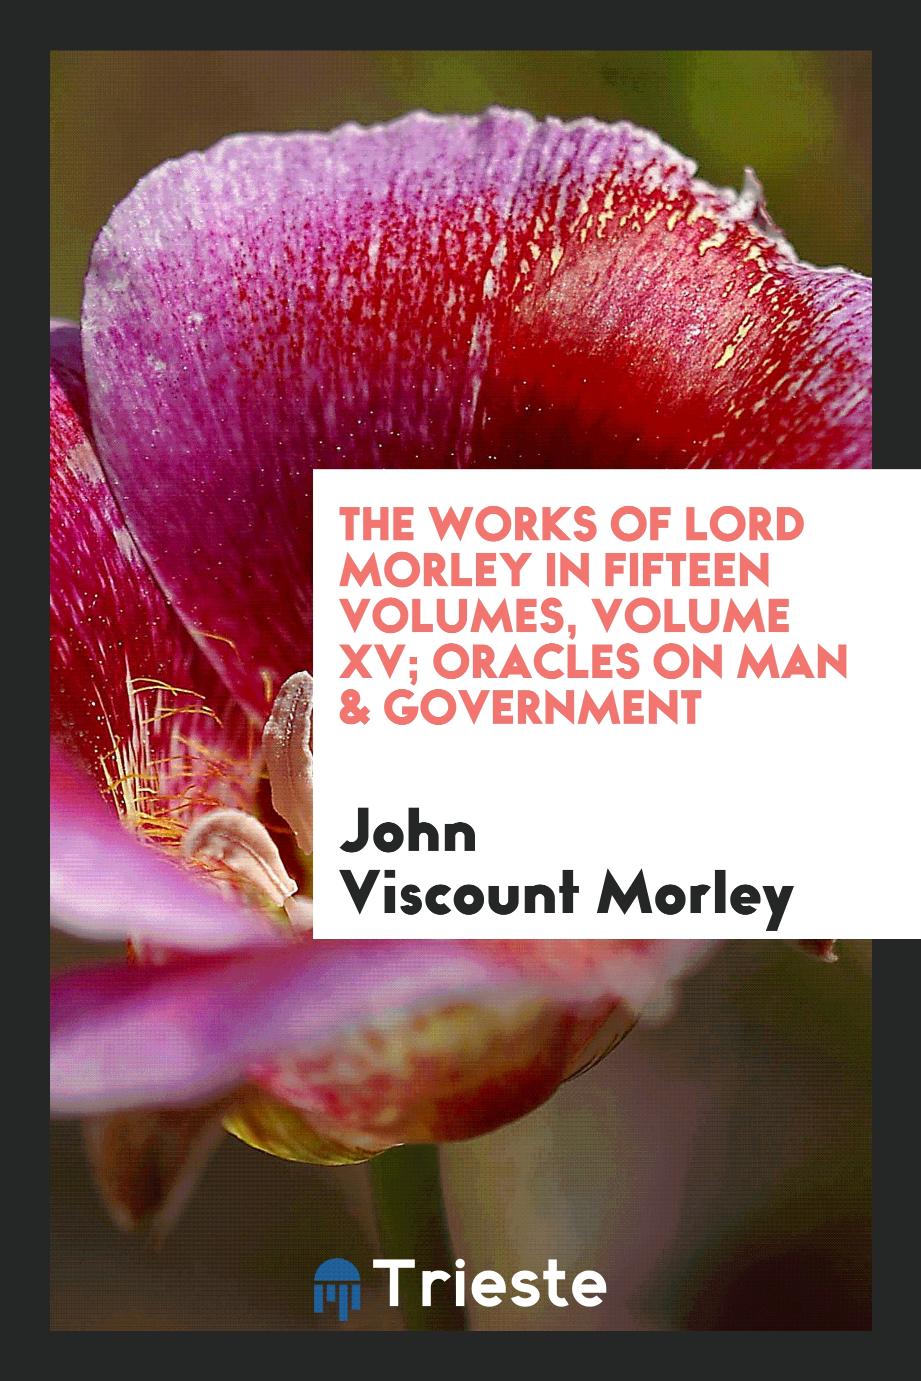 The Works of Lord Morley in fifteen Volumes, Volume XV; Oracles on Man & Government